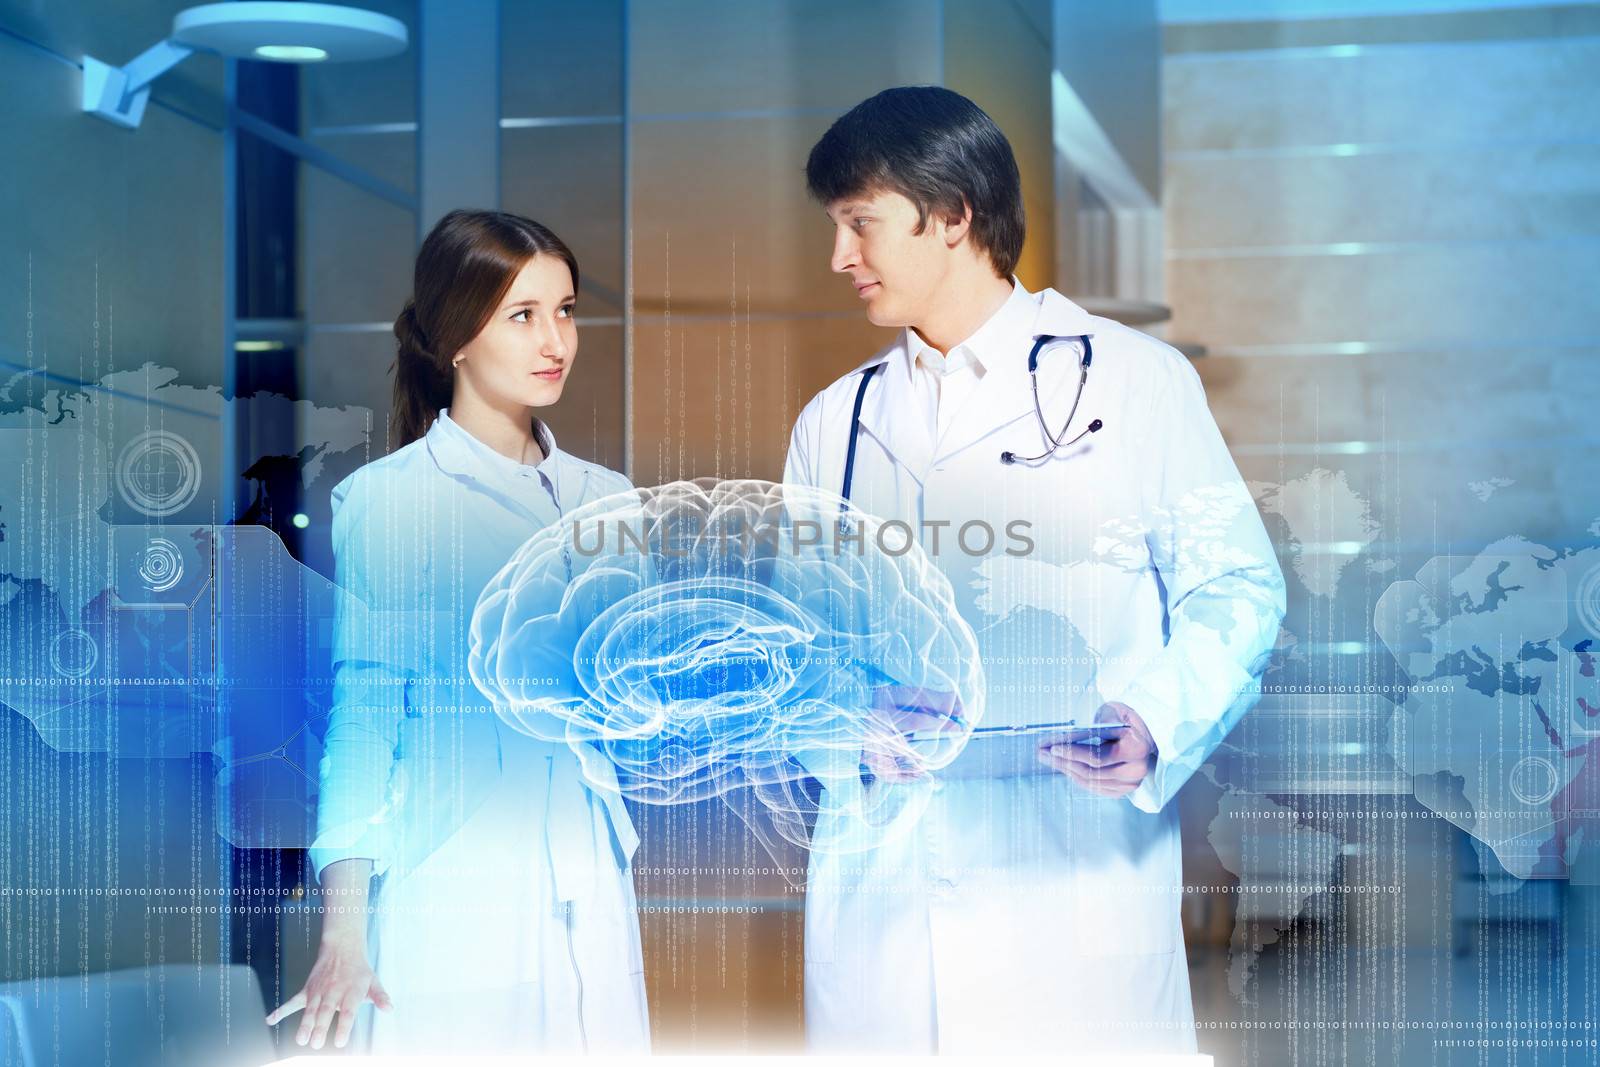 Image of two young doctors examining futuristic image of brain